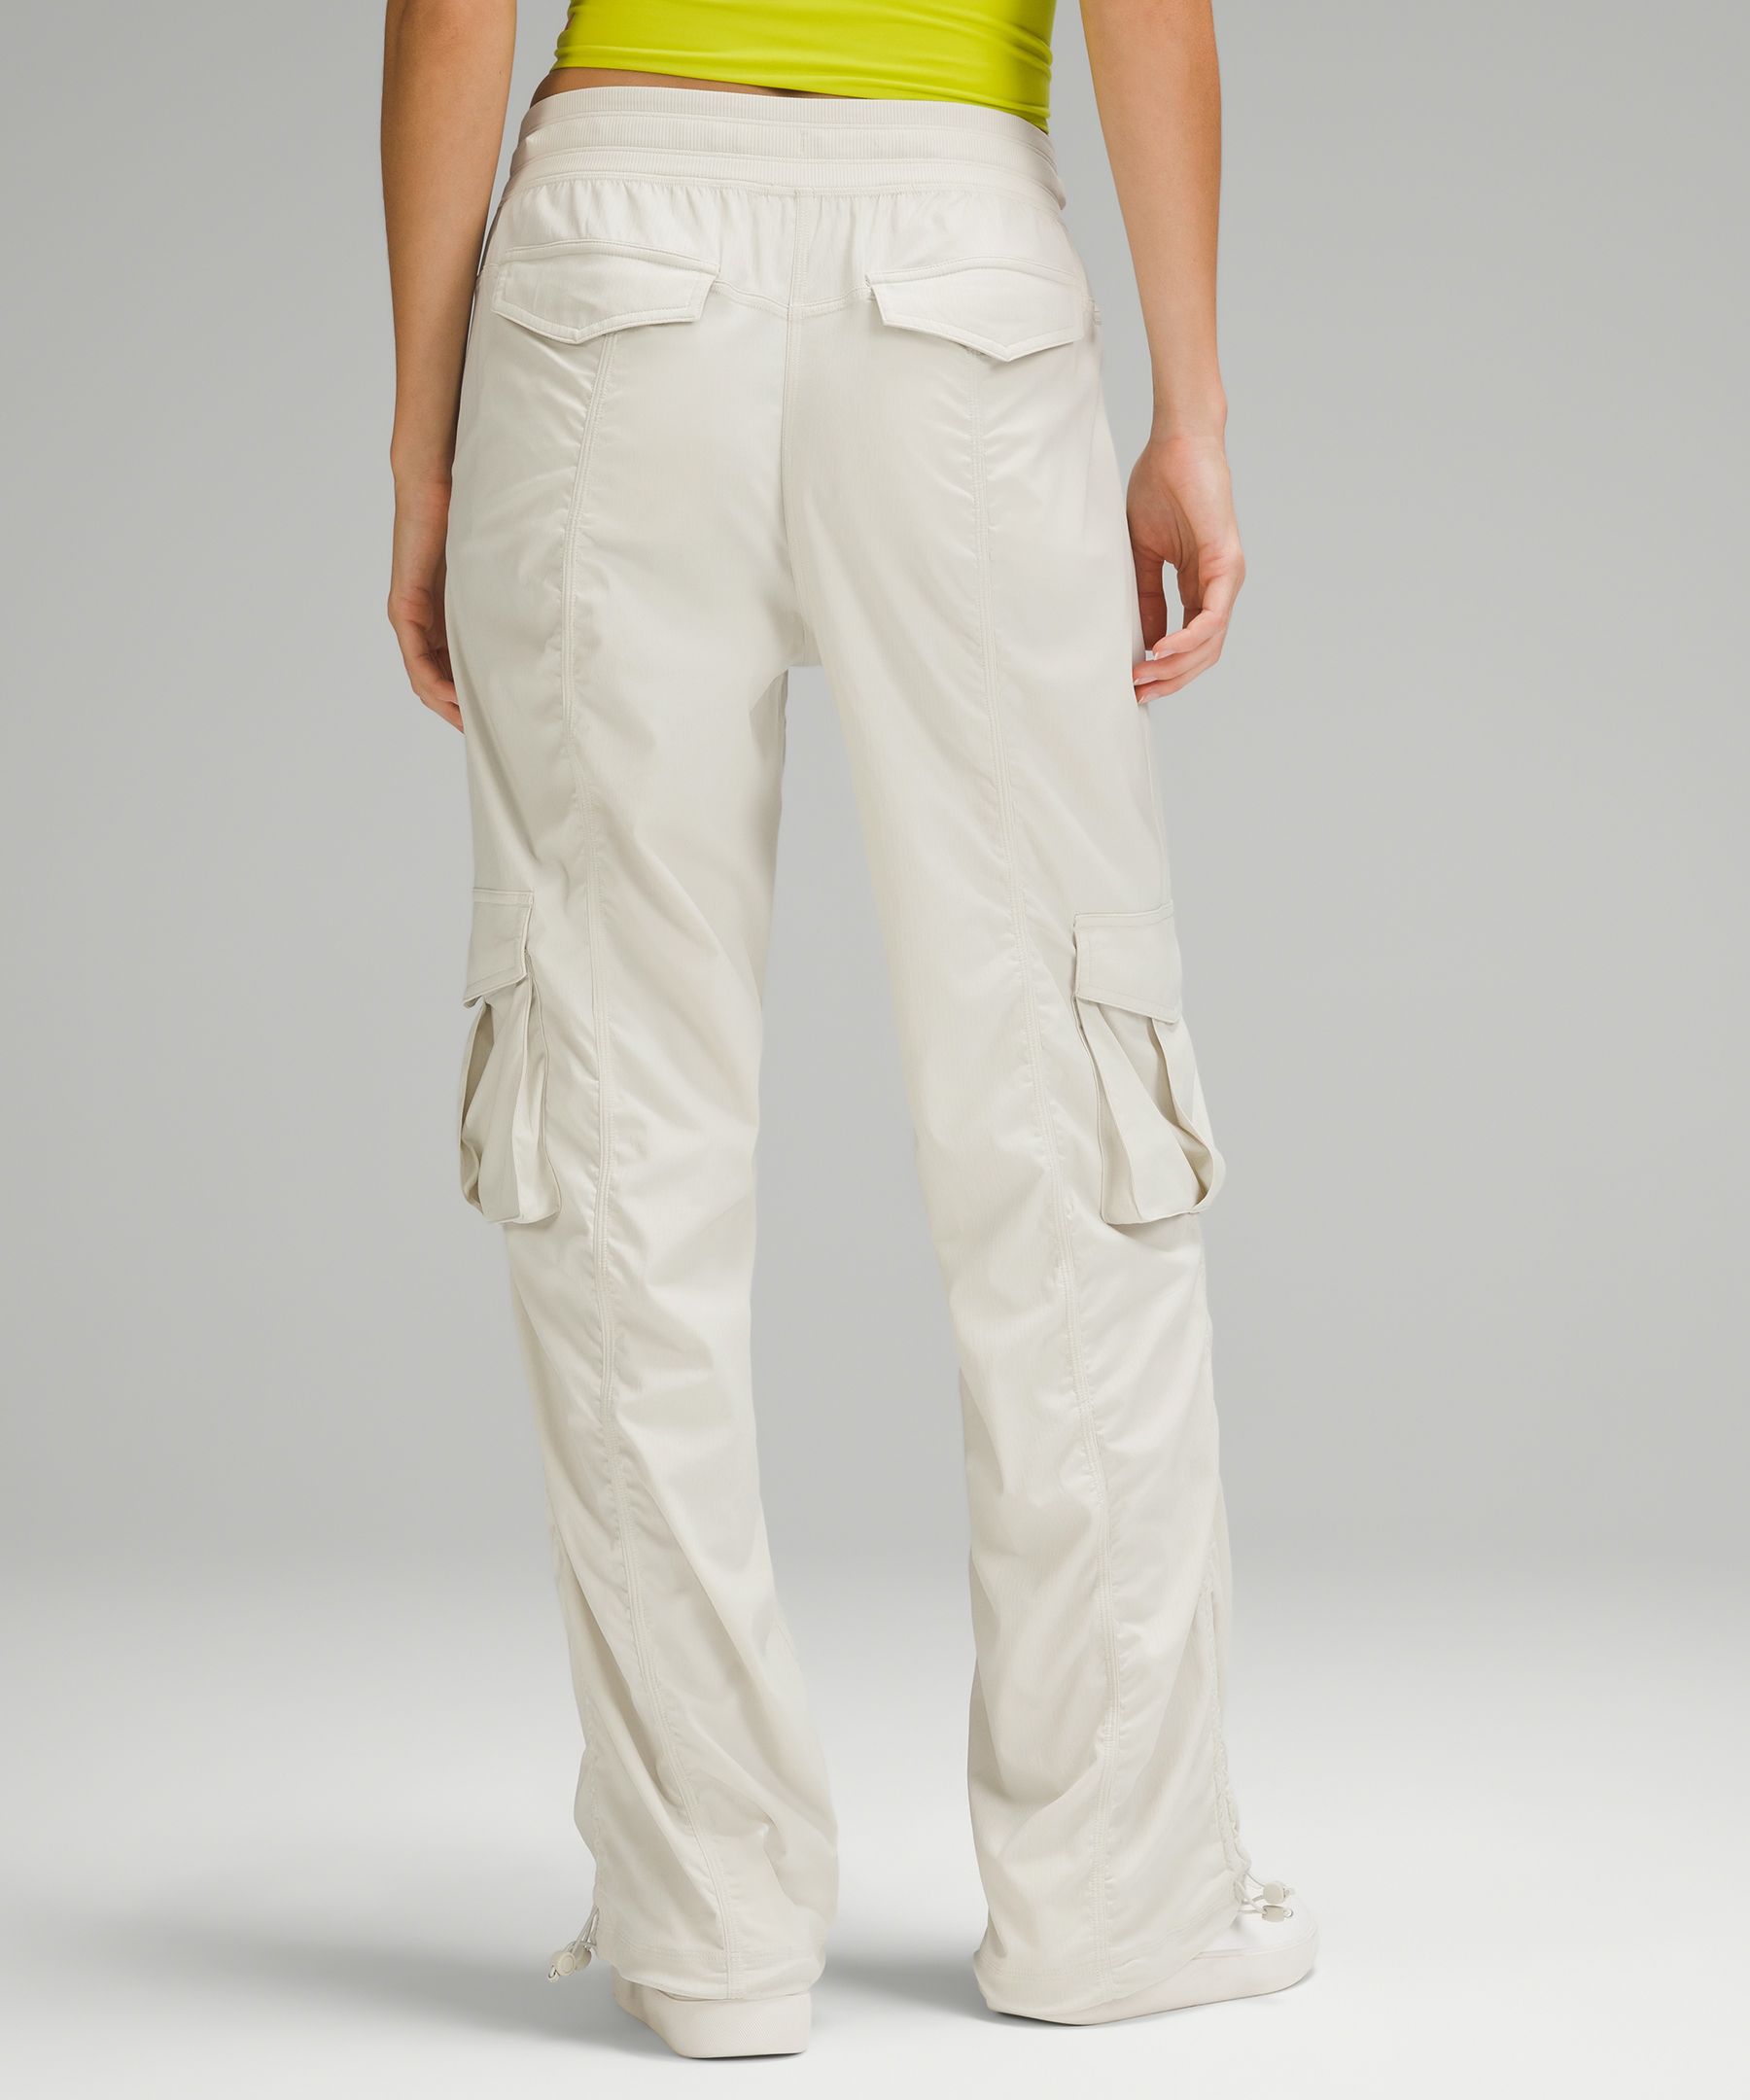 Lululemon Dance Studio Relaxed-Fit Mid-Rise Cargo Pant. 4